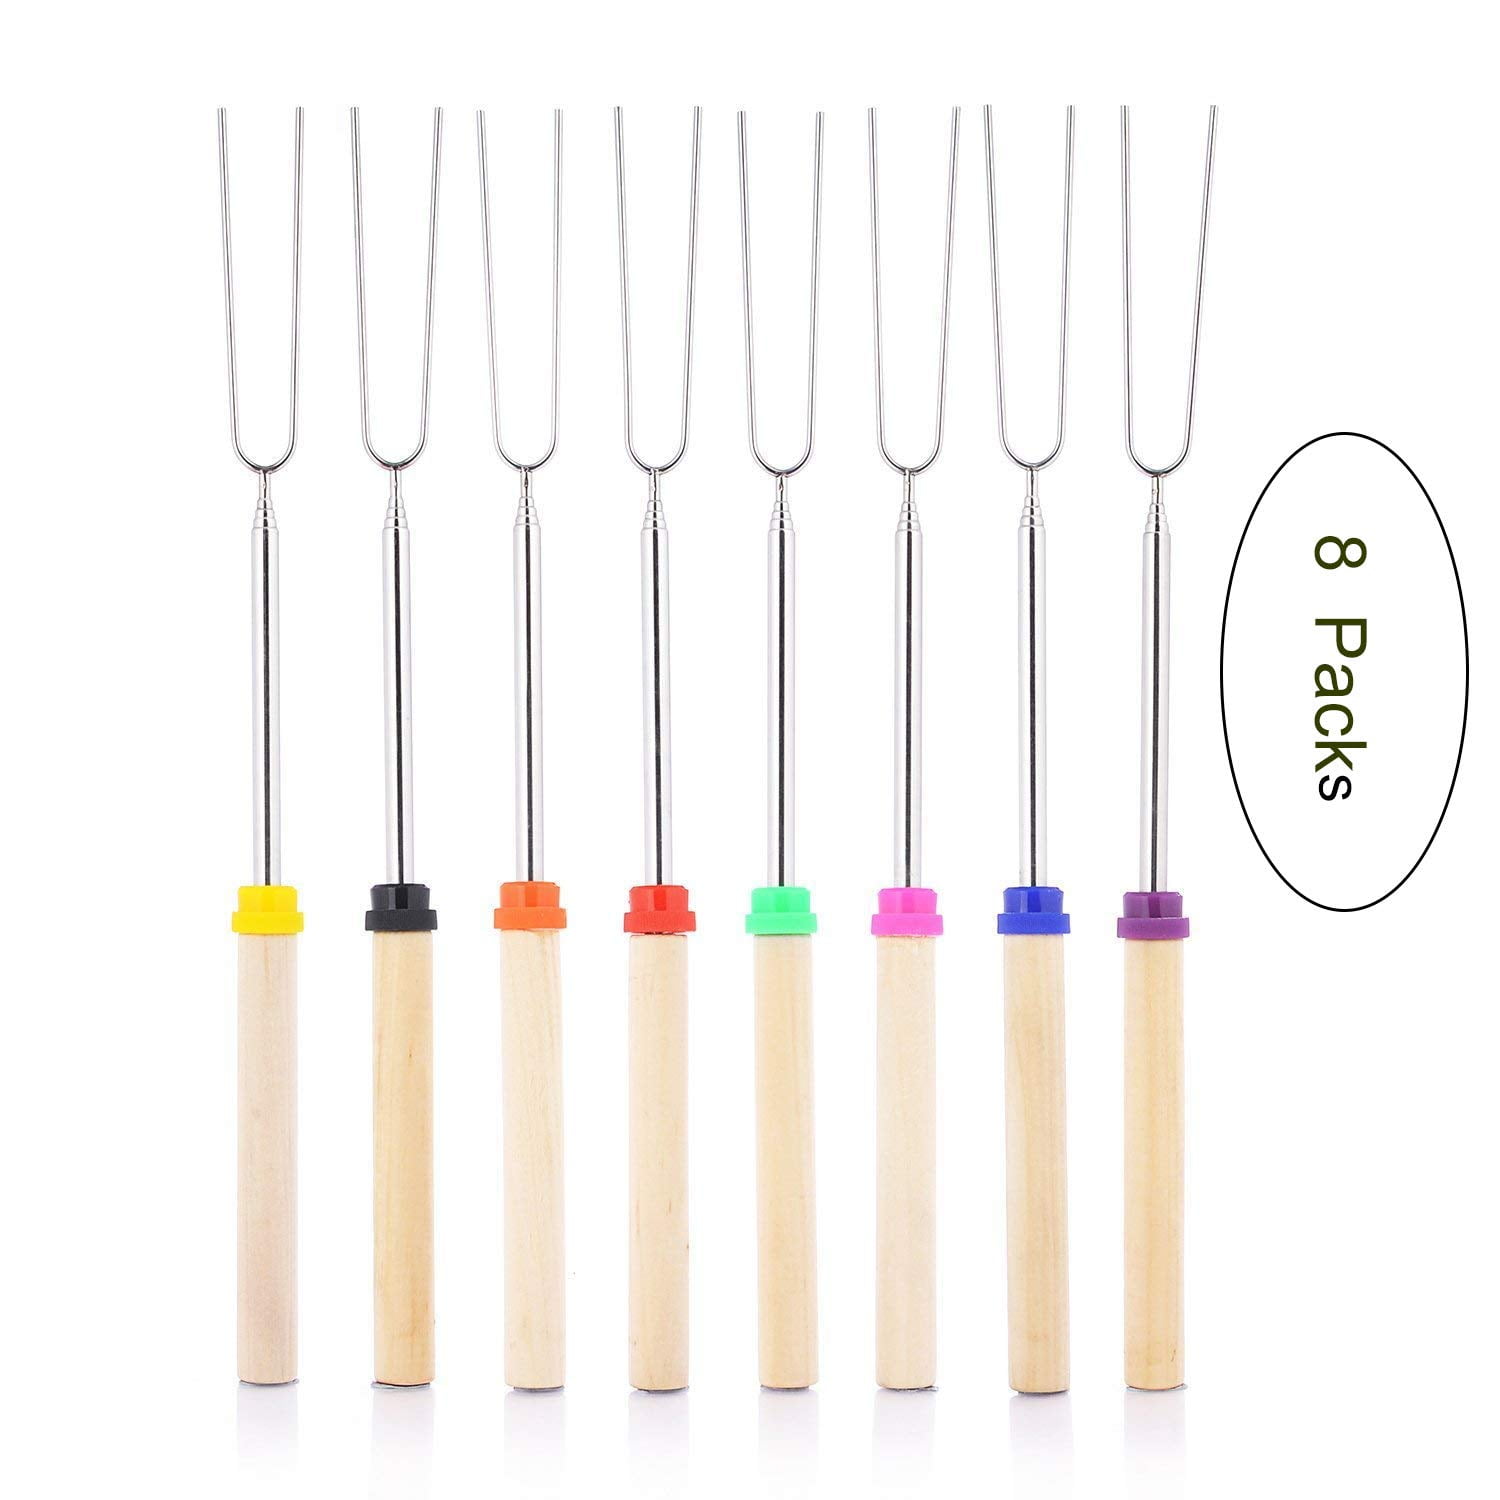 8 Pcs Telescopic BBQ Fork Marshmallow Roasting Sticks Fire Pit Smores Skewers US